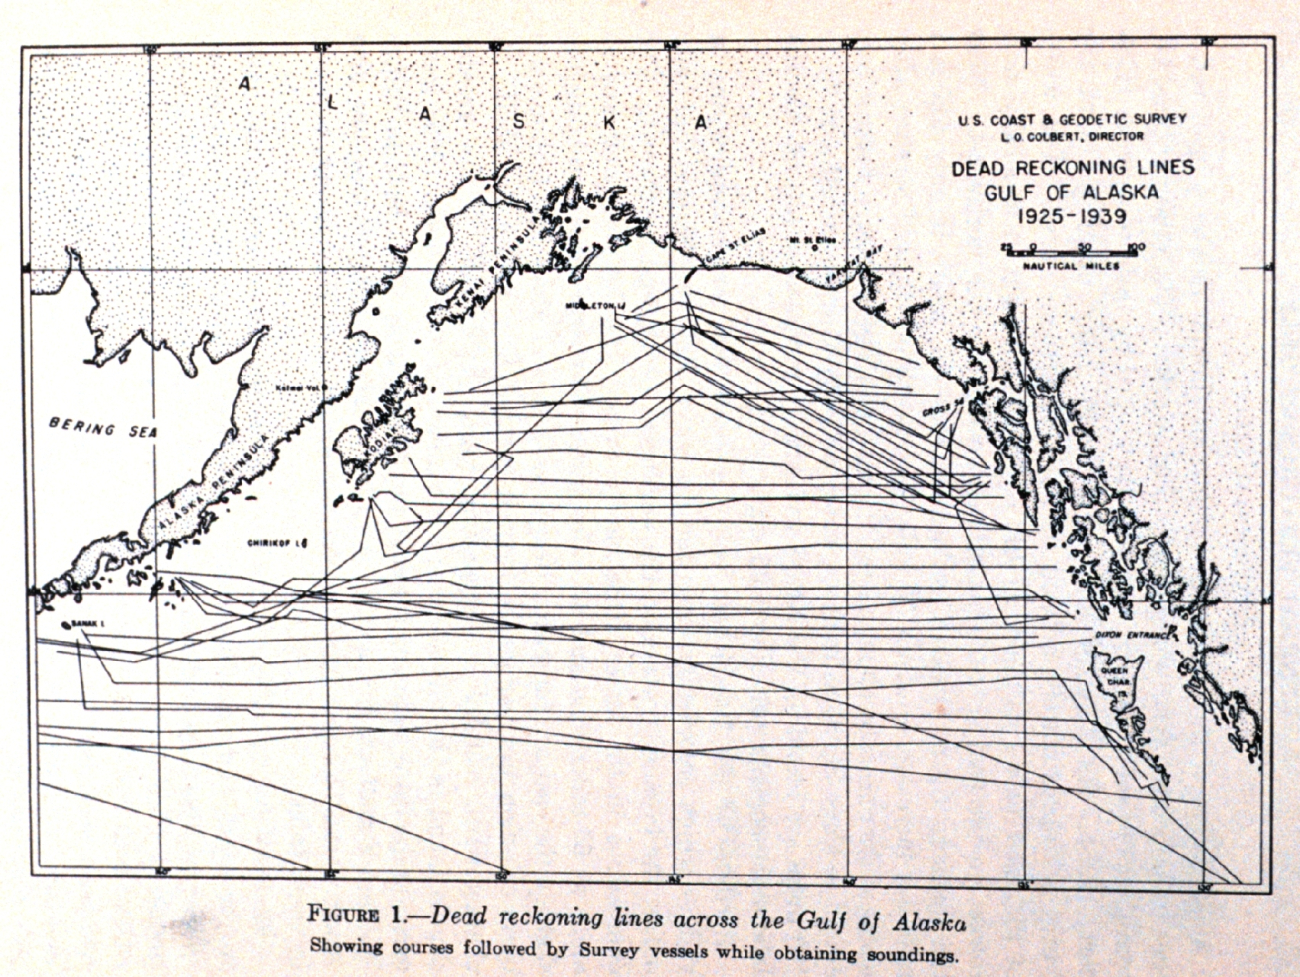 Systematic mapping of the Gulf of Alaska by C&GS; ships going to and fromtheir Alaska nautical charting surveys led to the discoveries shown in imagesmap00126 and map00128